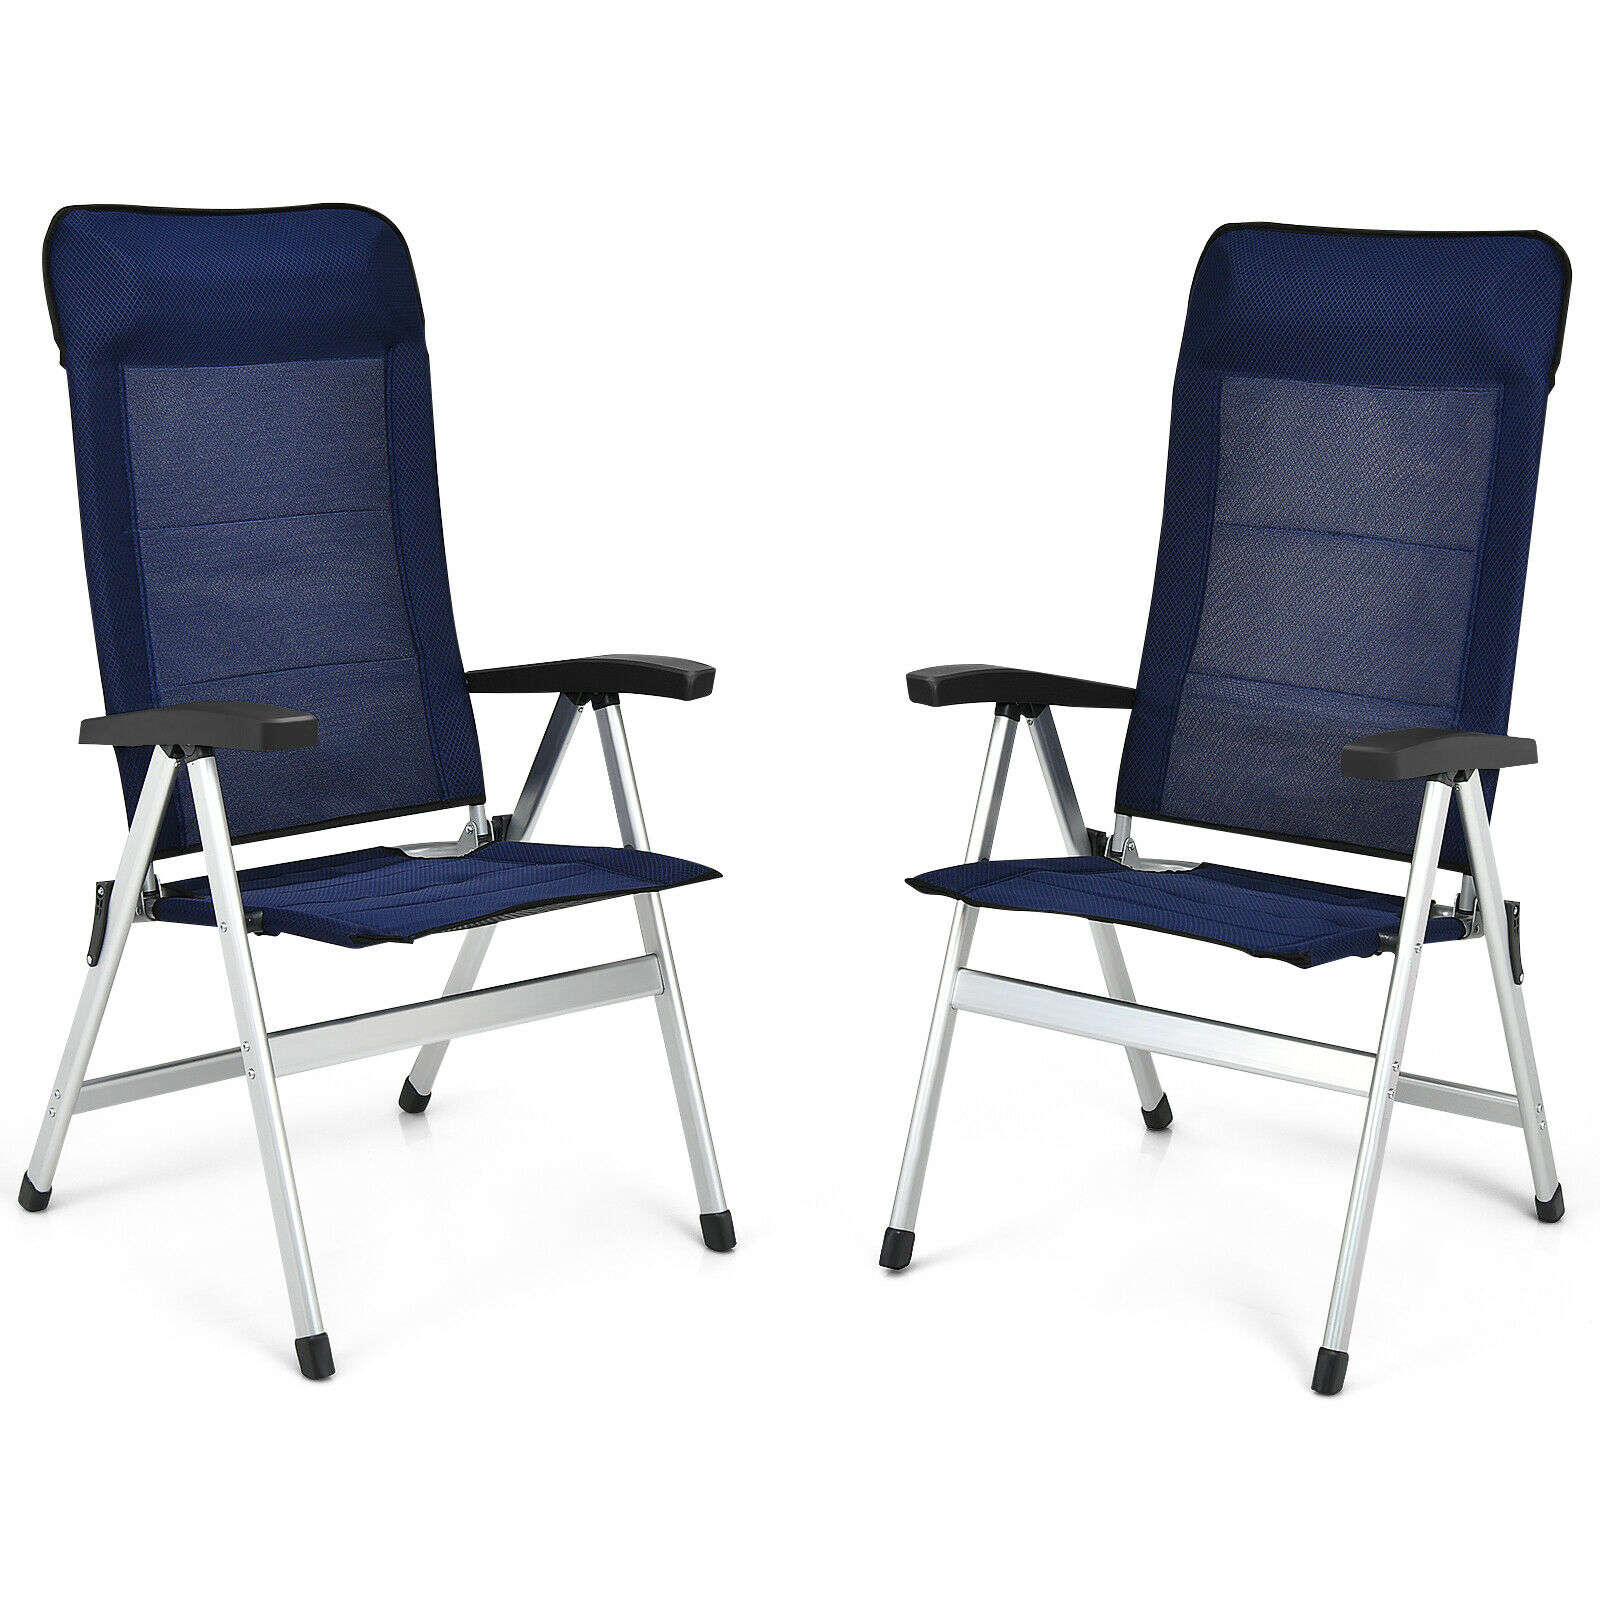 Patiojoy 4PCS Outdoor Patio Folding Dining Chairs with Reclining Backrest and Headrest Navy - image 2 of 6